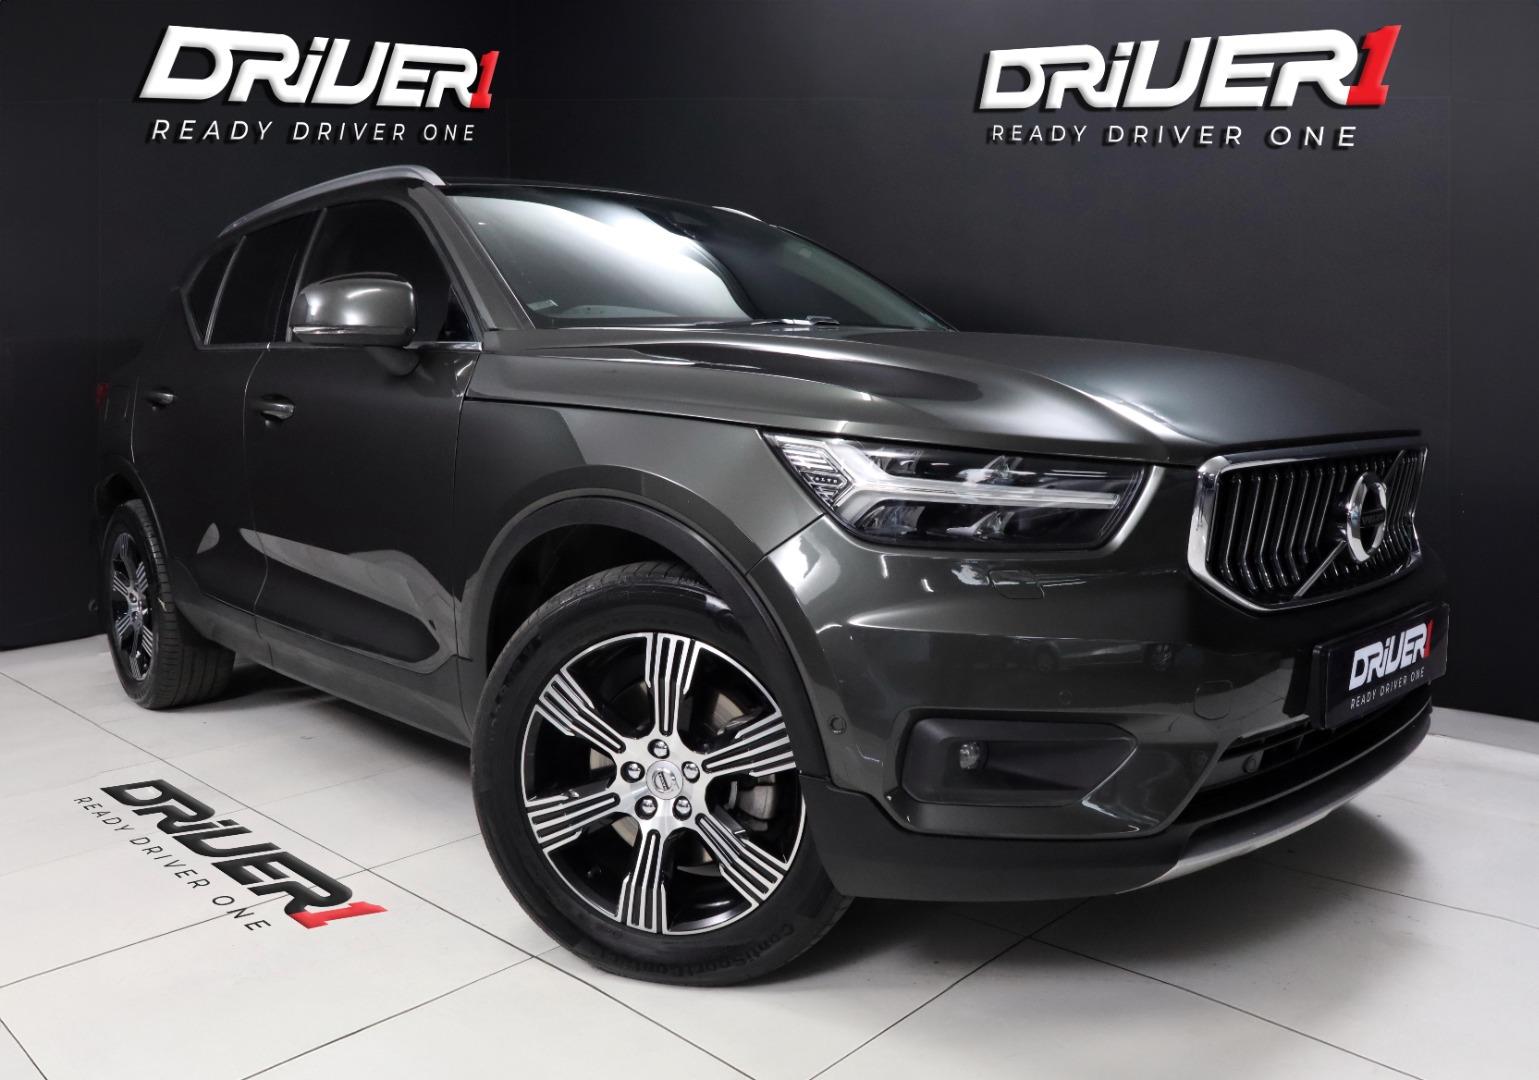 2018 Volvo Xc40 D4 Inscription Awd Geartronic for sale - 343051